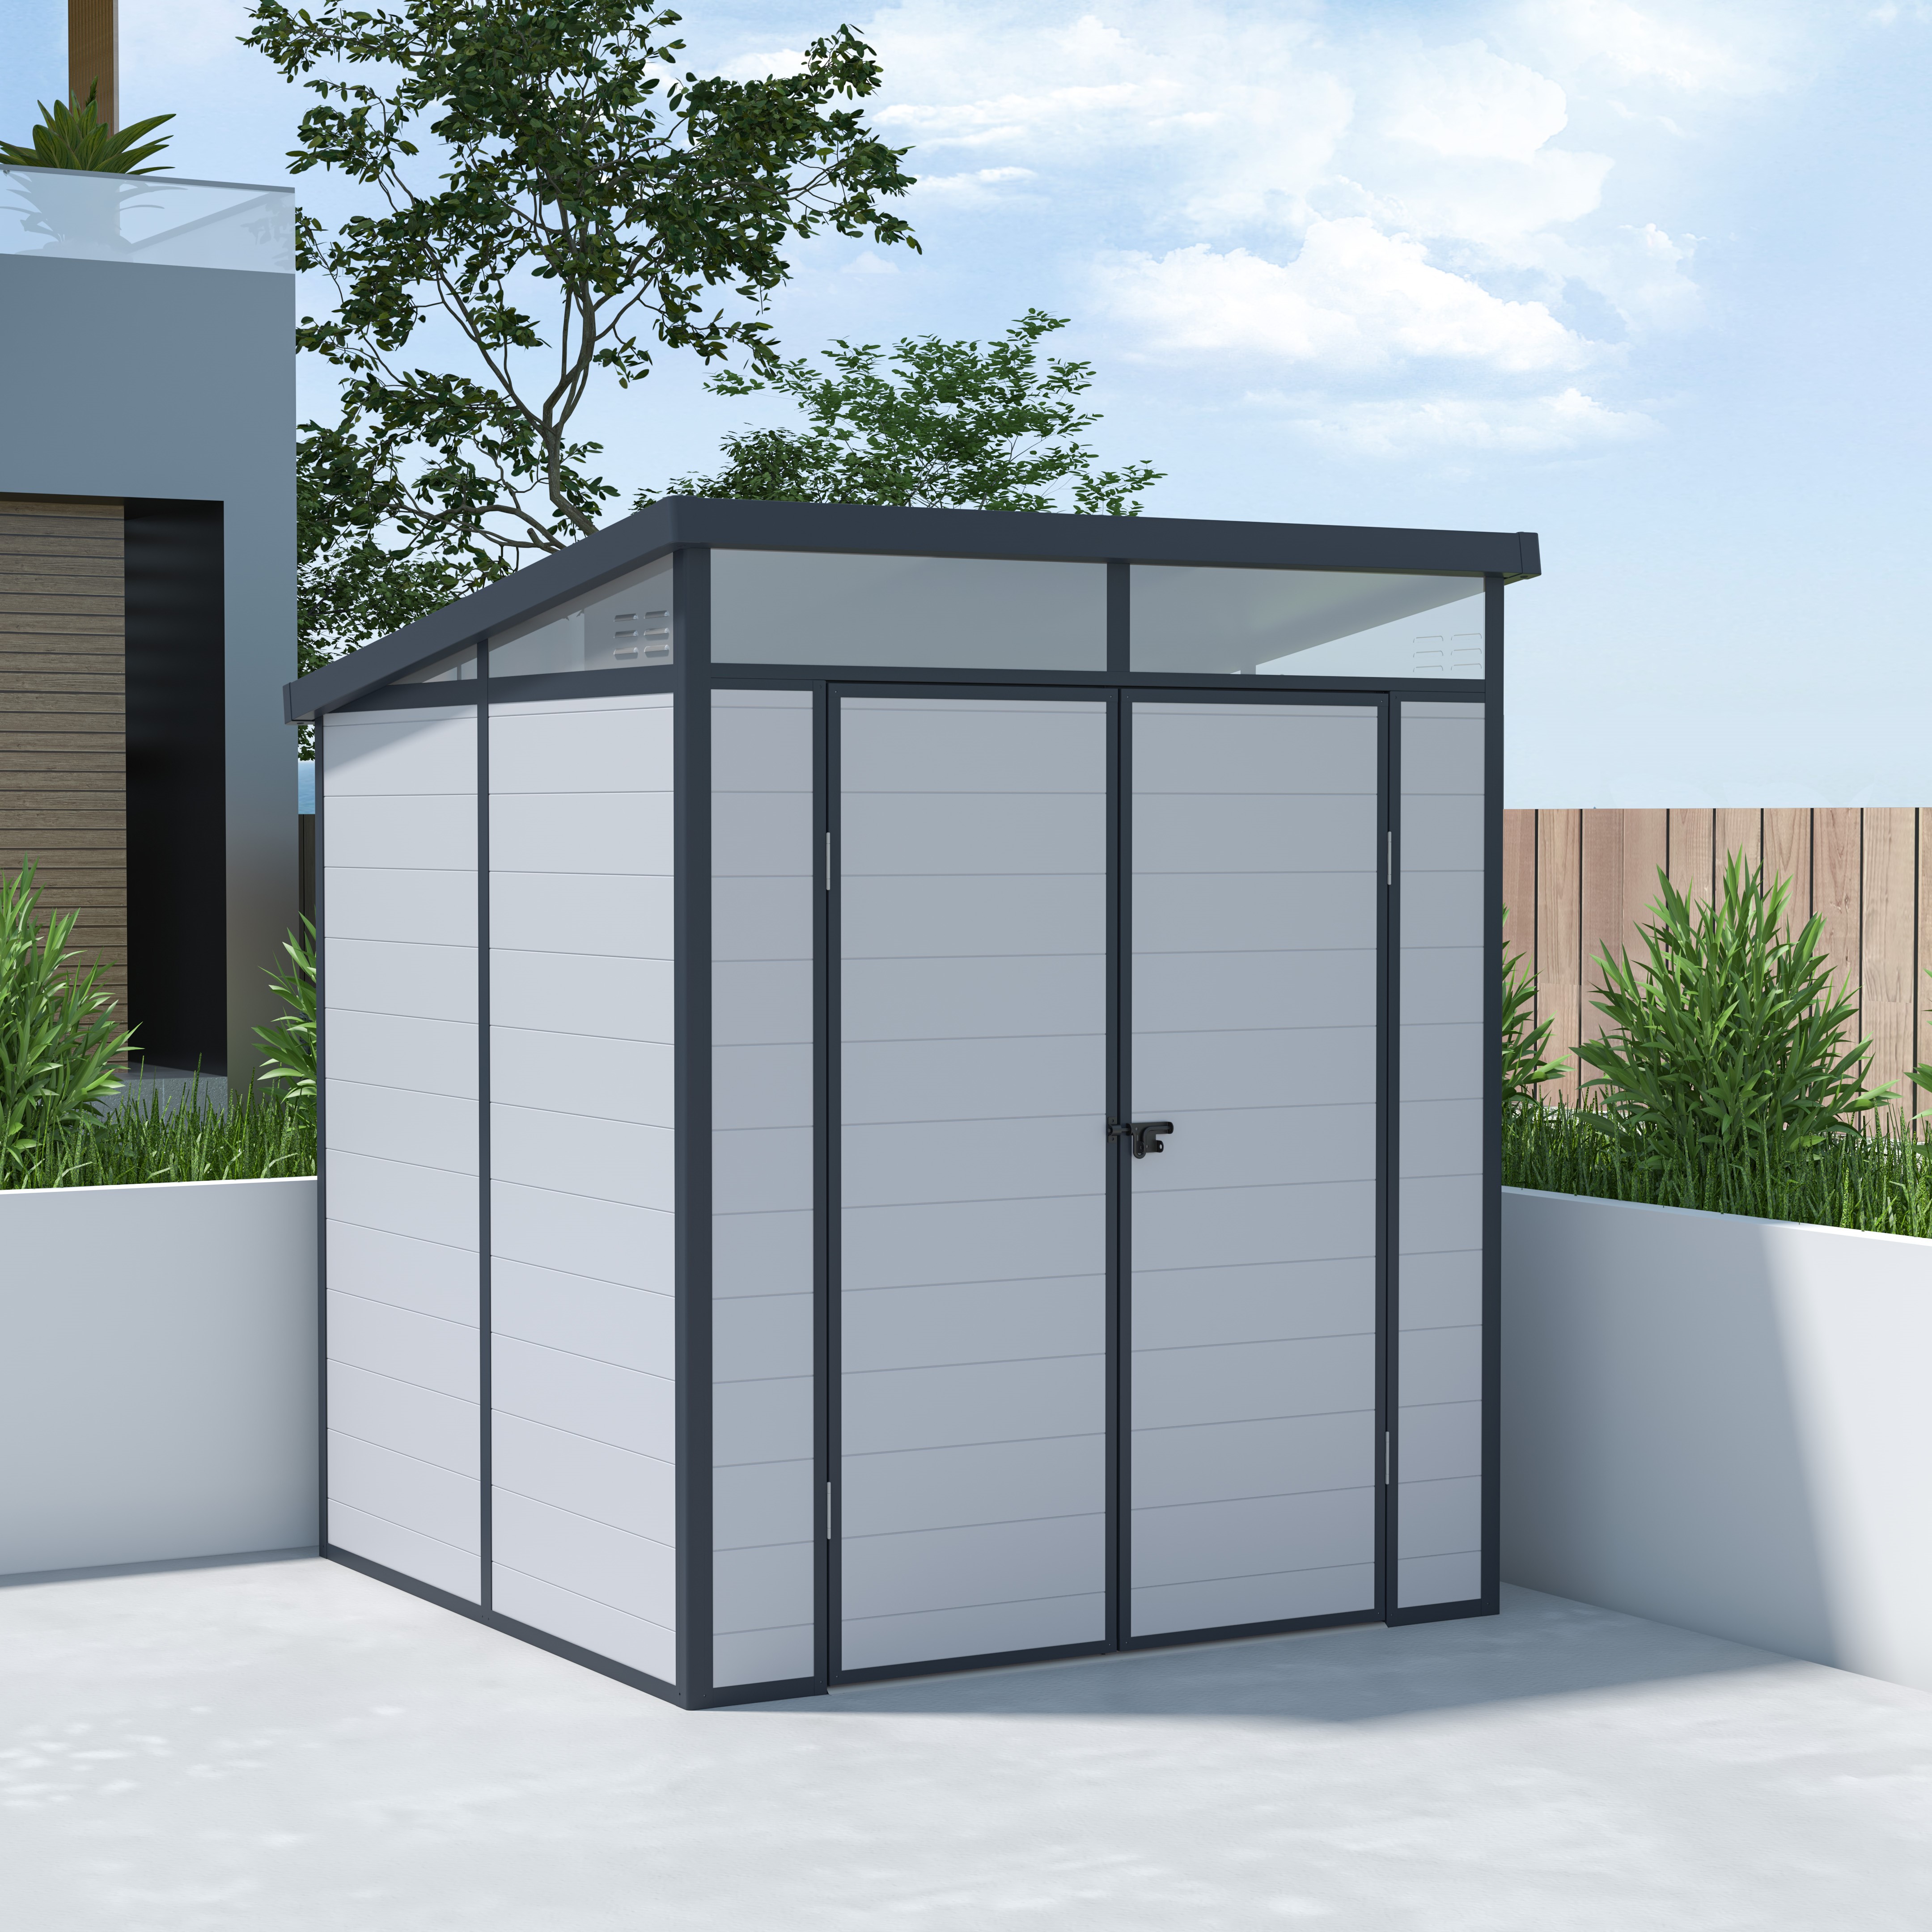 BillyOh Stafford Pent White Plastic Shed - 6x6 Grey